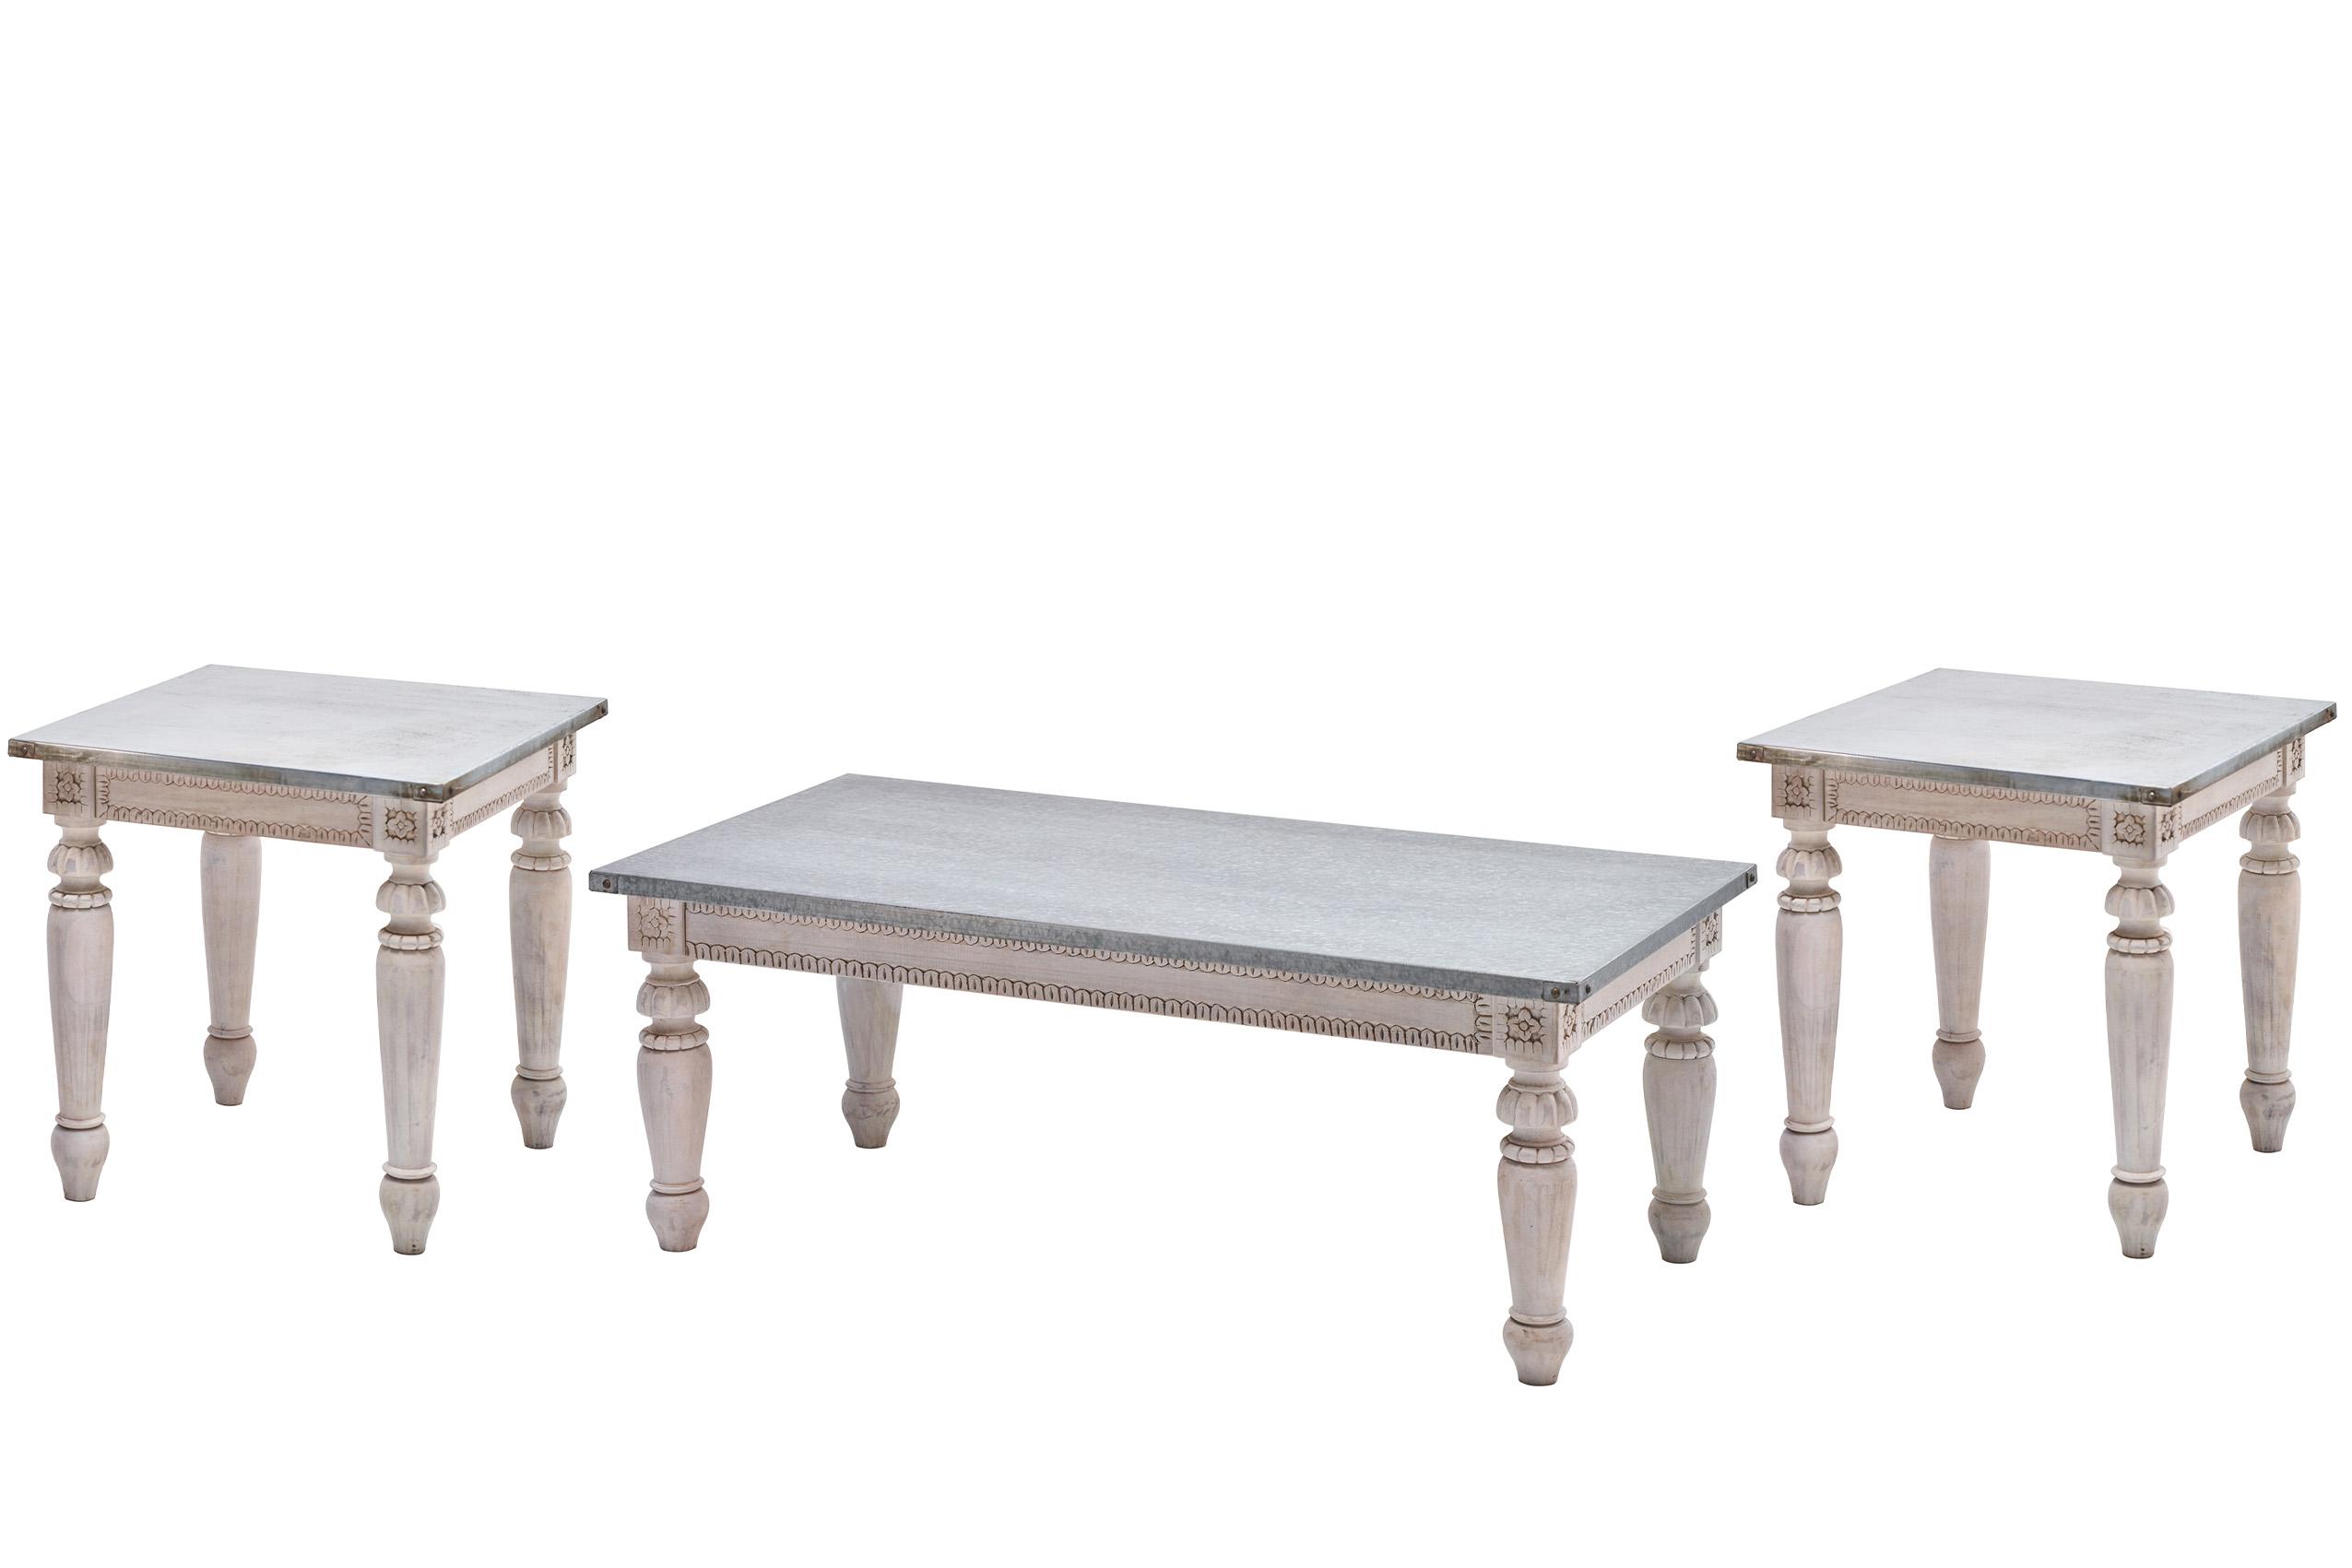 Modern, Classic Coffee Table Set SS-10566 SS-10568 SS-10566-Set-3 in Antique White 